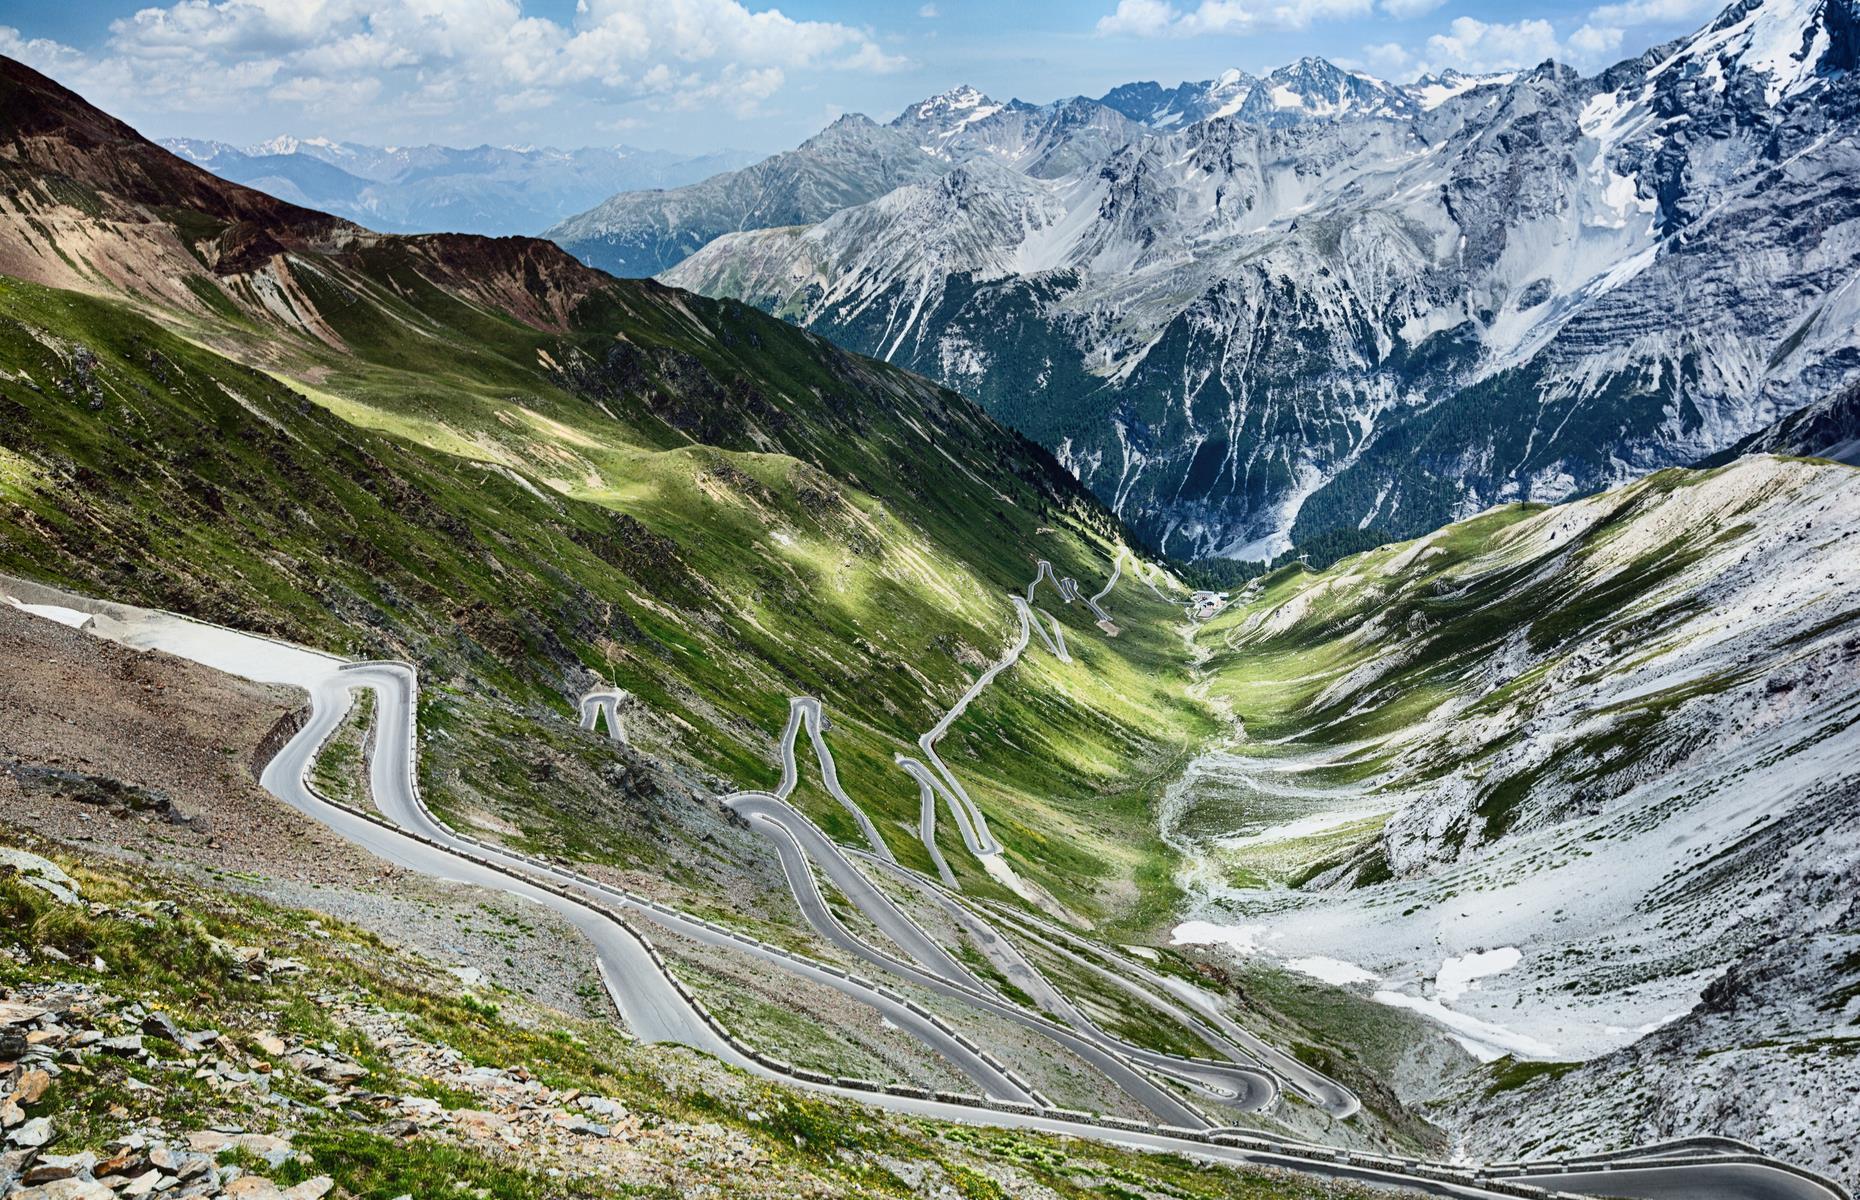 Cyclists, motorbikers and motorists alike laud this infamous mountain pass in the Italian alps near the Swiss border as one of the ultimate roads. At just over 9,000 feet (2,743m), Stelvio Pass is the second highest mountain pass in the Alps. But it's the 48 hairpin turns that make it the most amazing. The original road dates back to the 1820s. It's open between May and November.